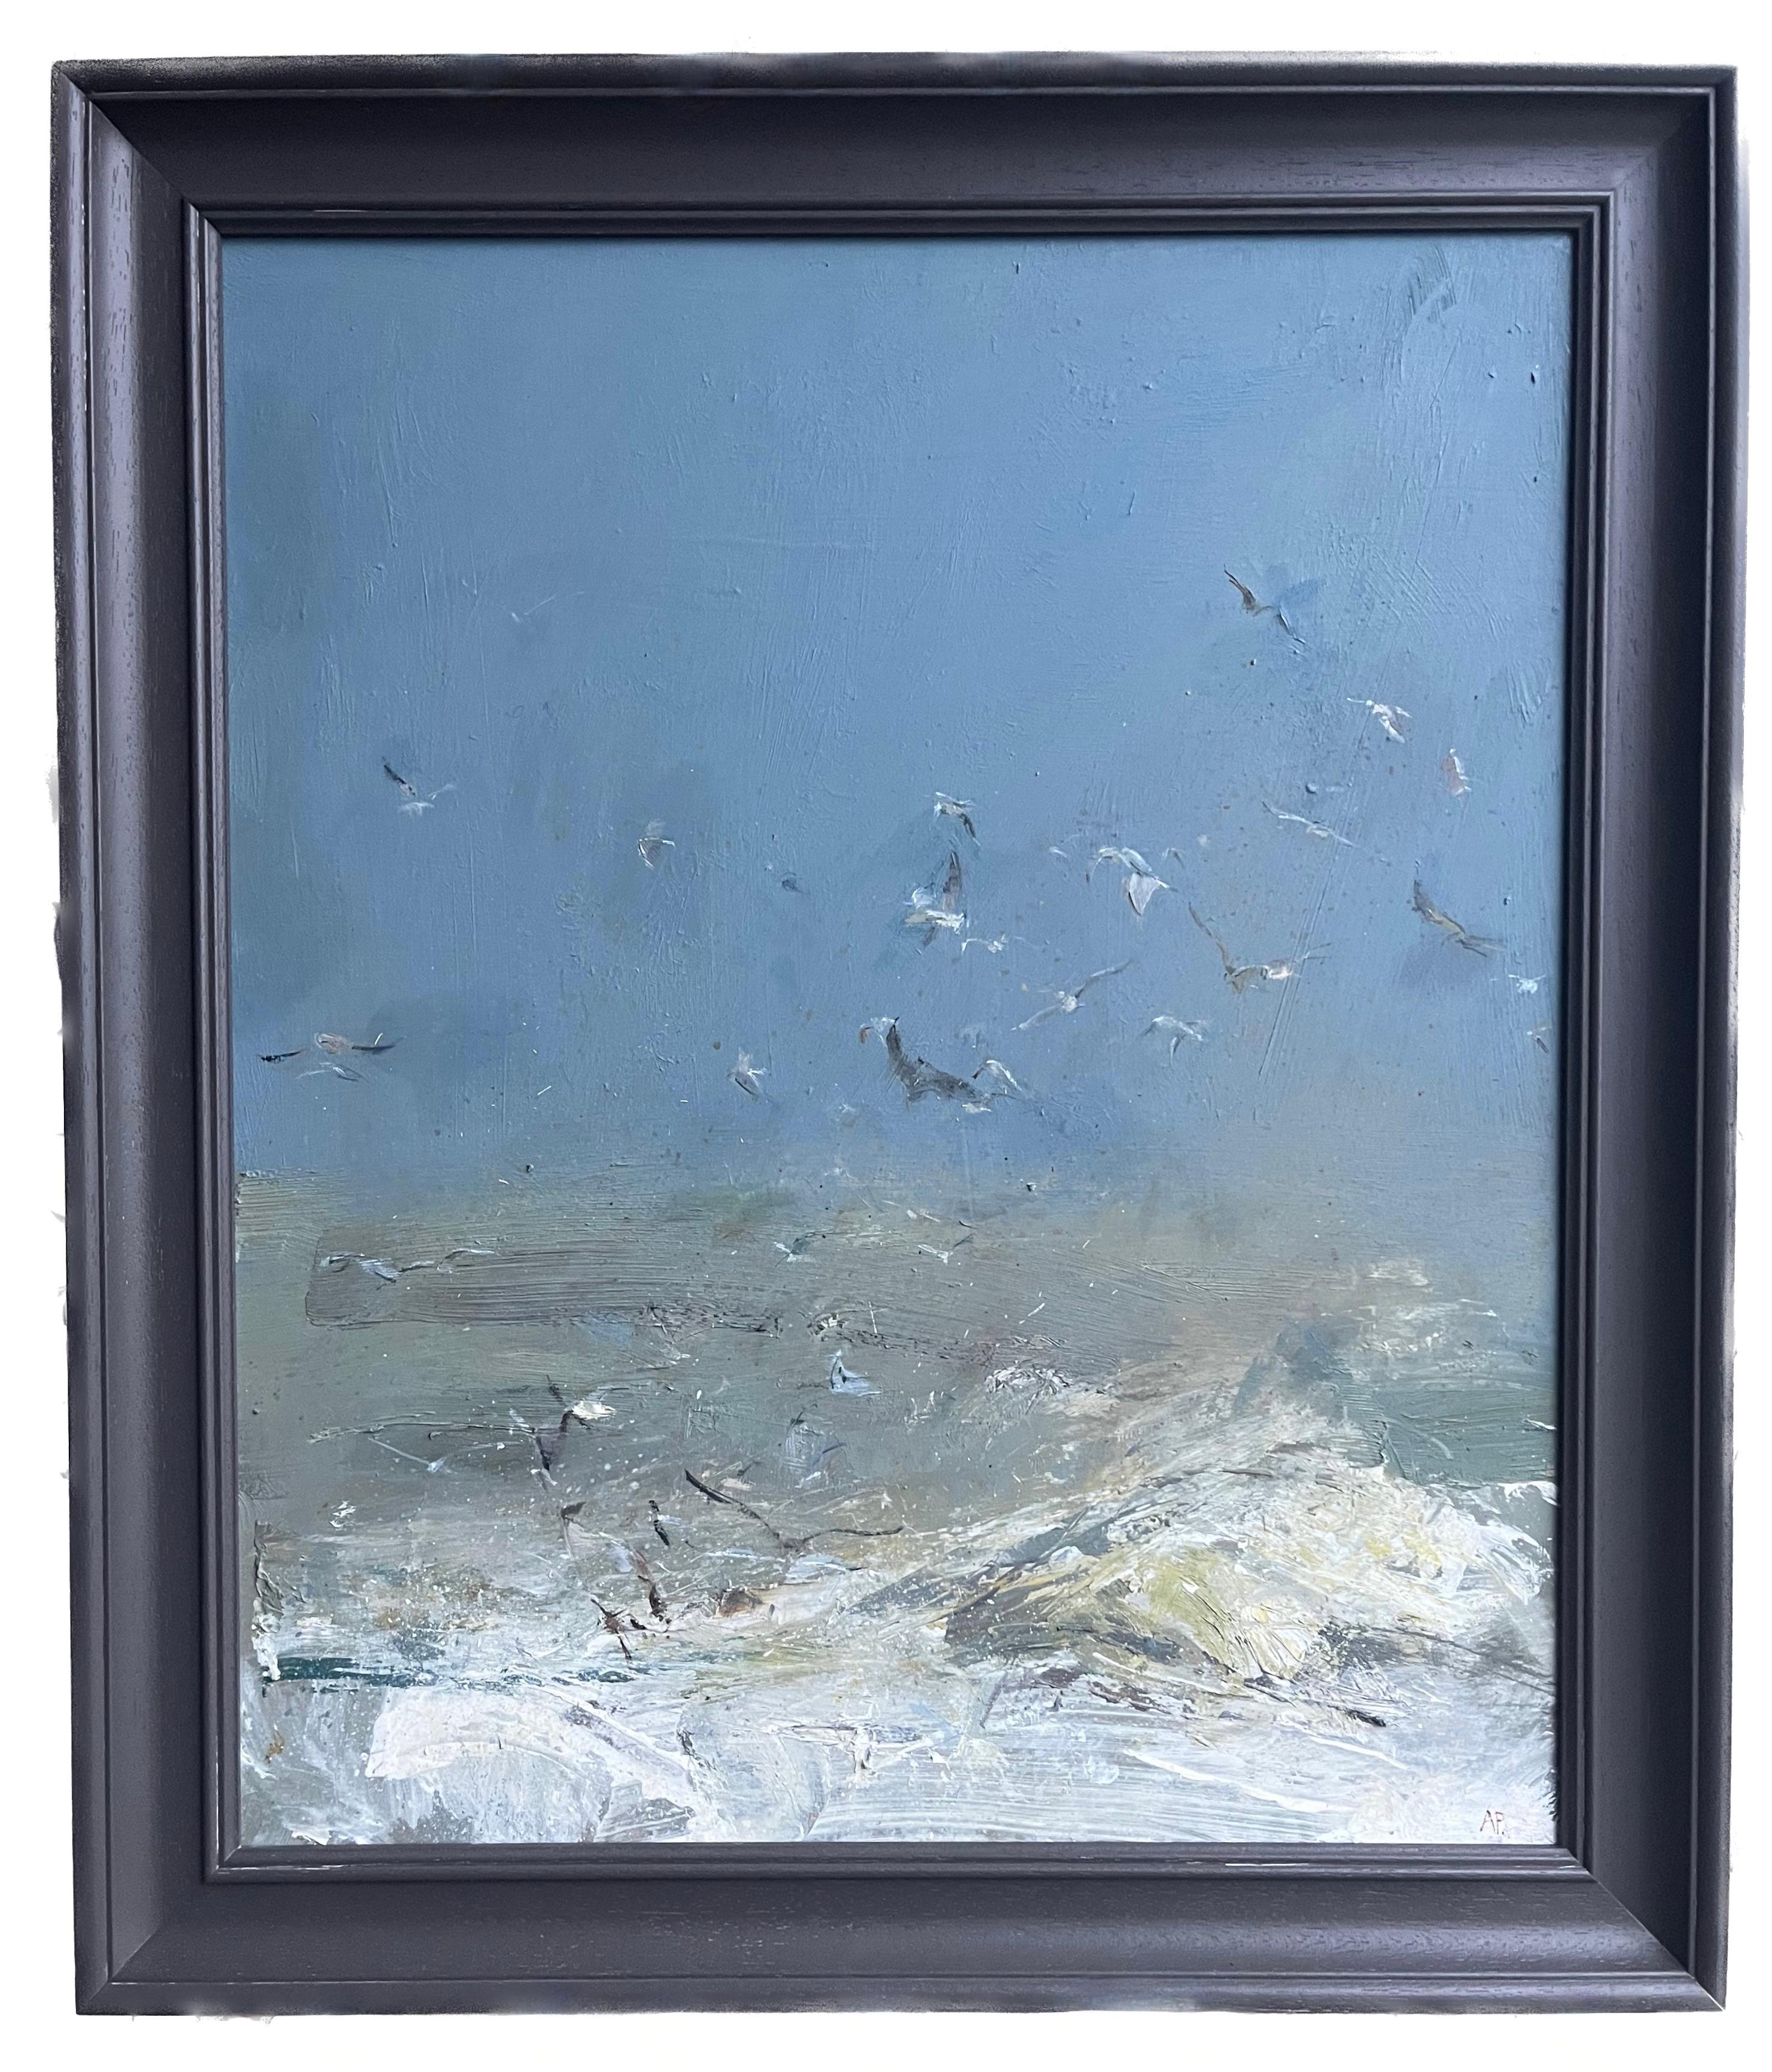 A really striking image of birds in flight over crashing waves

Adrian Parnell (b.1952)
Birdscape
Signed with initials
Inscribed with title and date verso
Oil on board
24 x 20 inches without frame
28 x 24 with frame

Adrian Parnell was born in